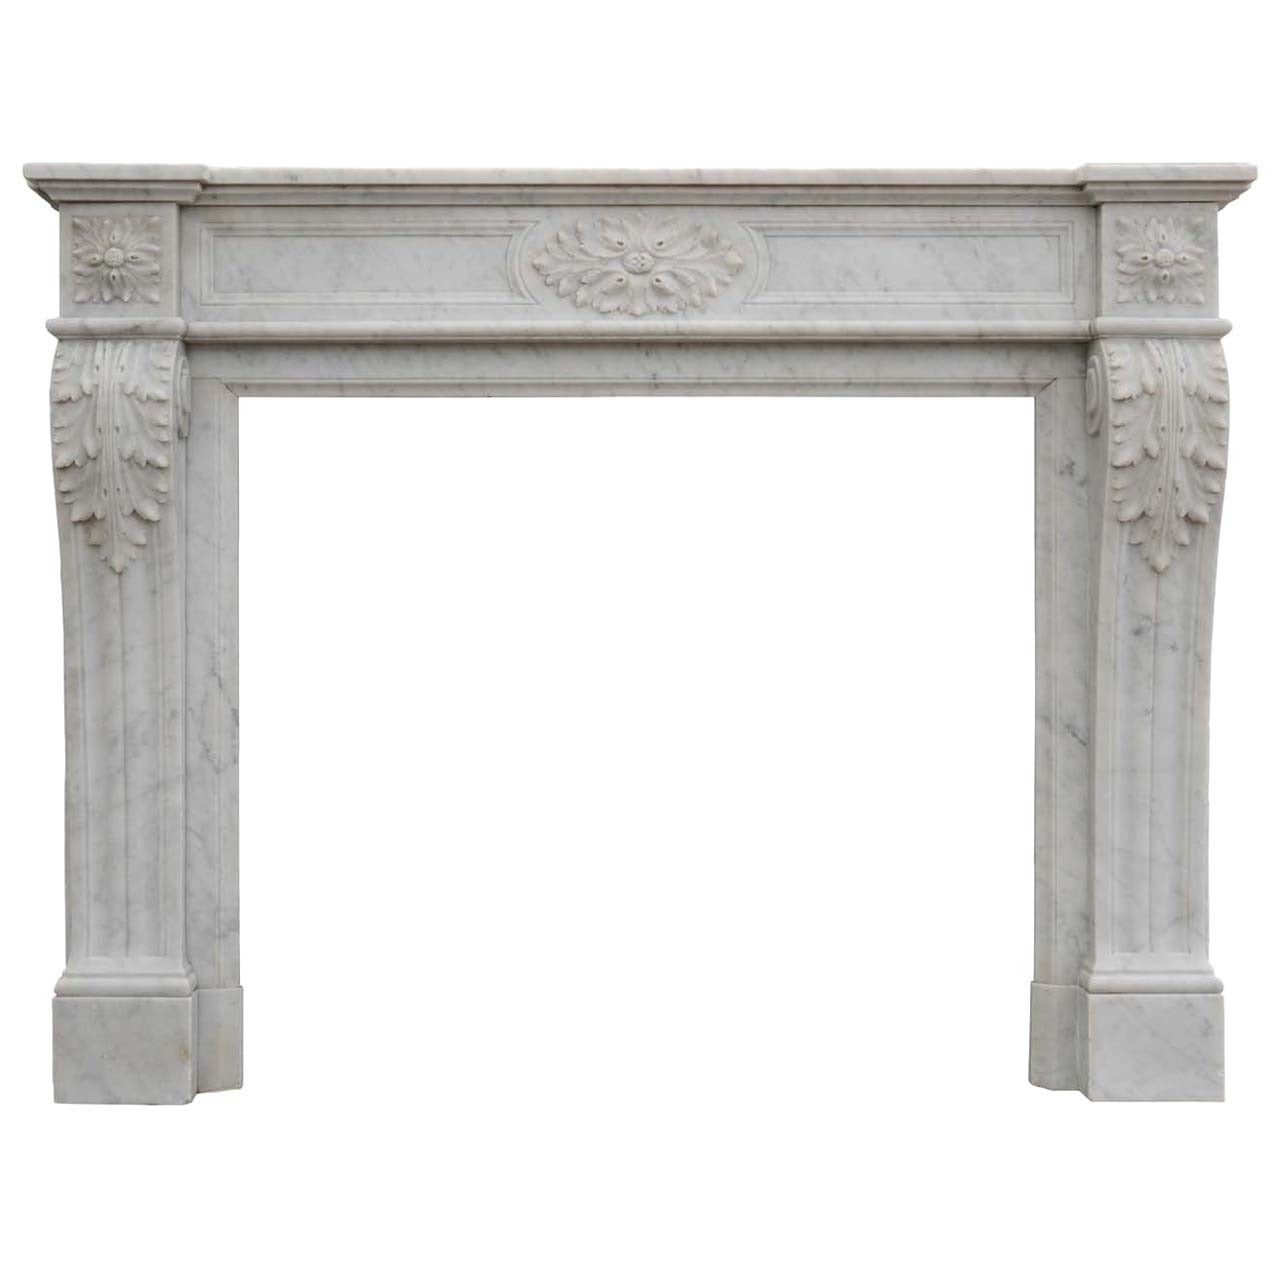 French Louis XVI Style White Marble Fireplace, 19th Century For Sale